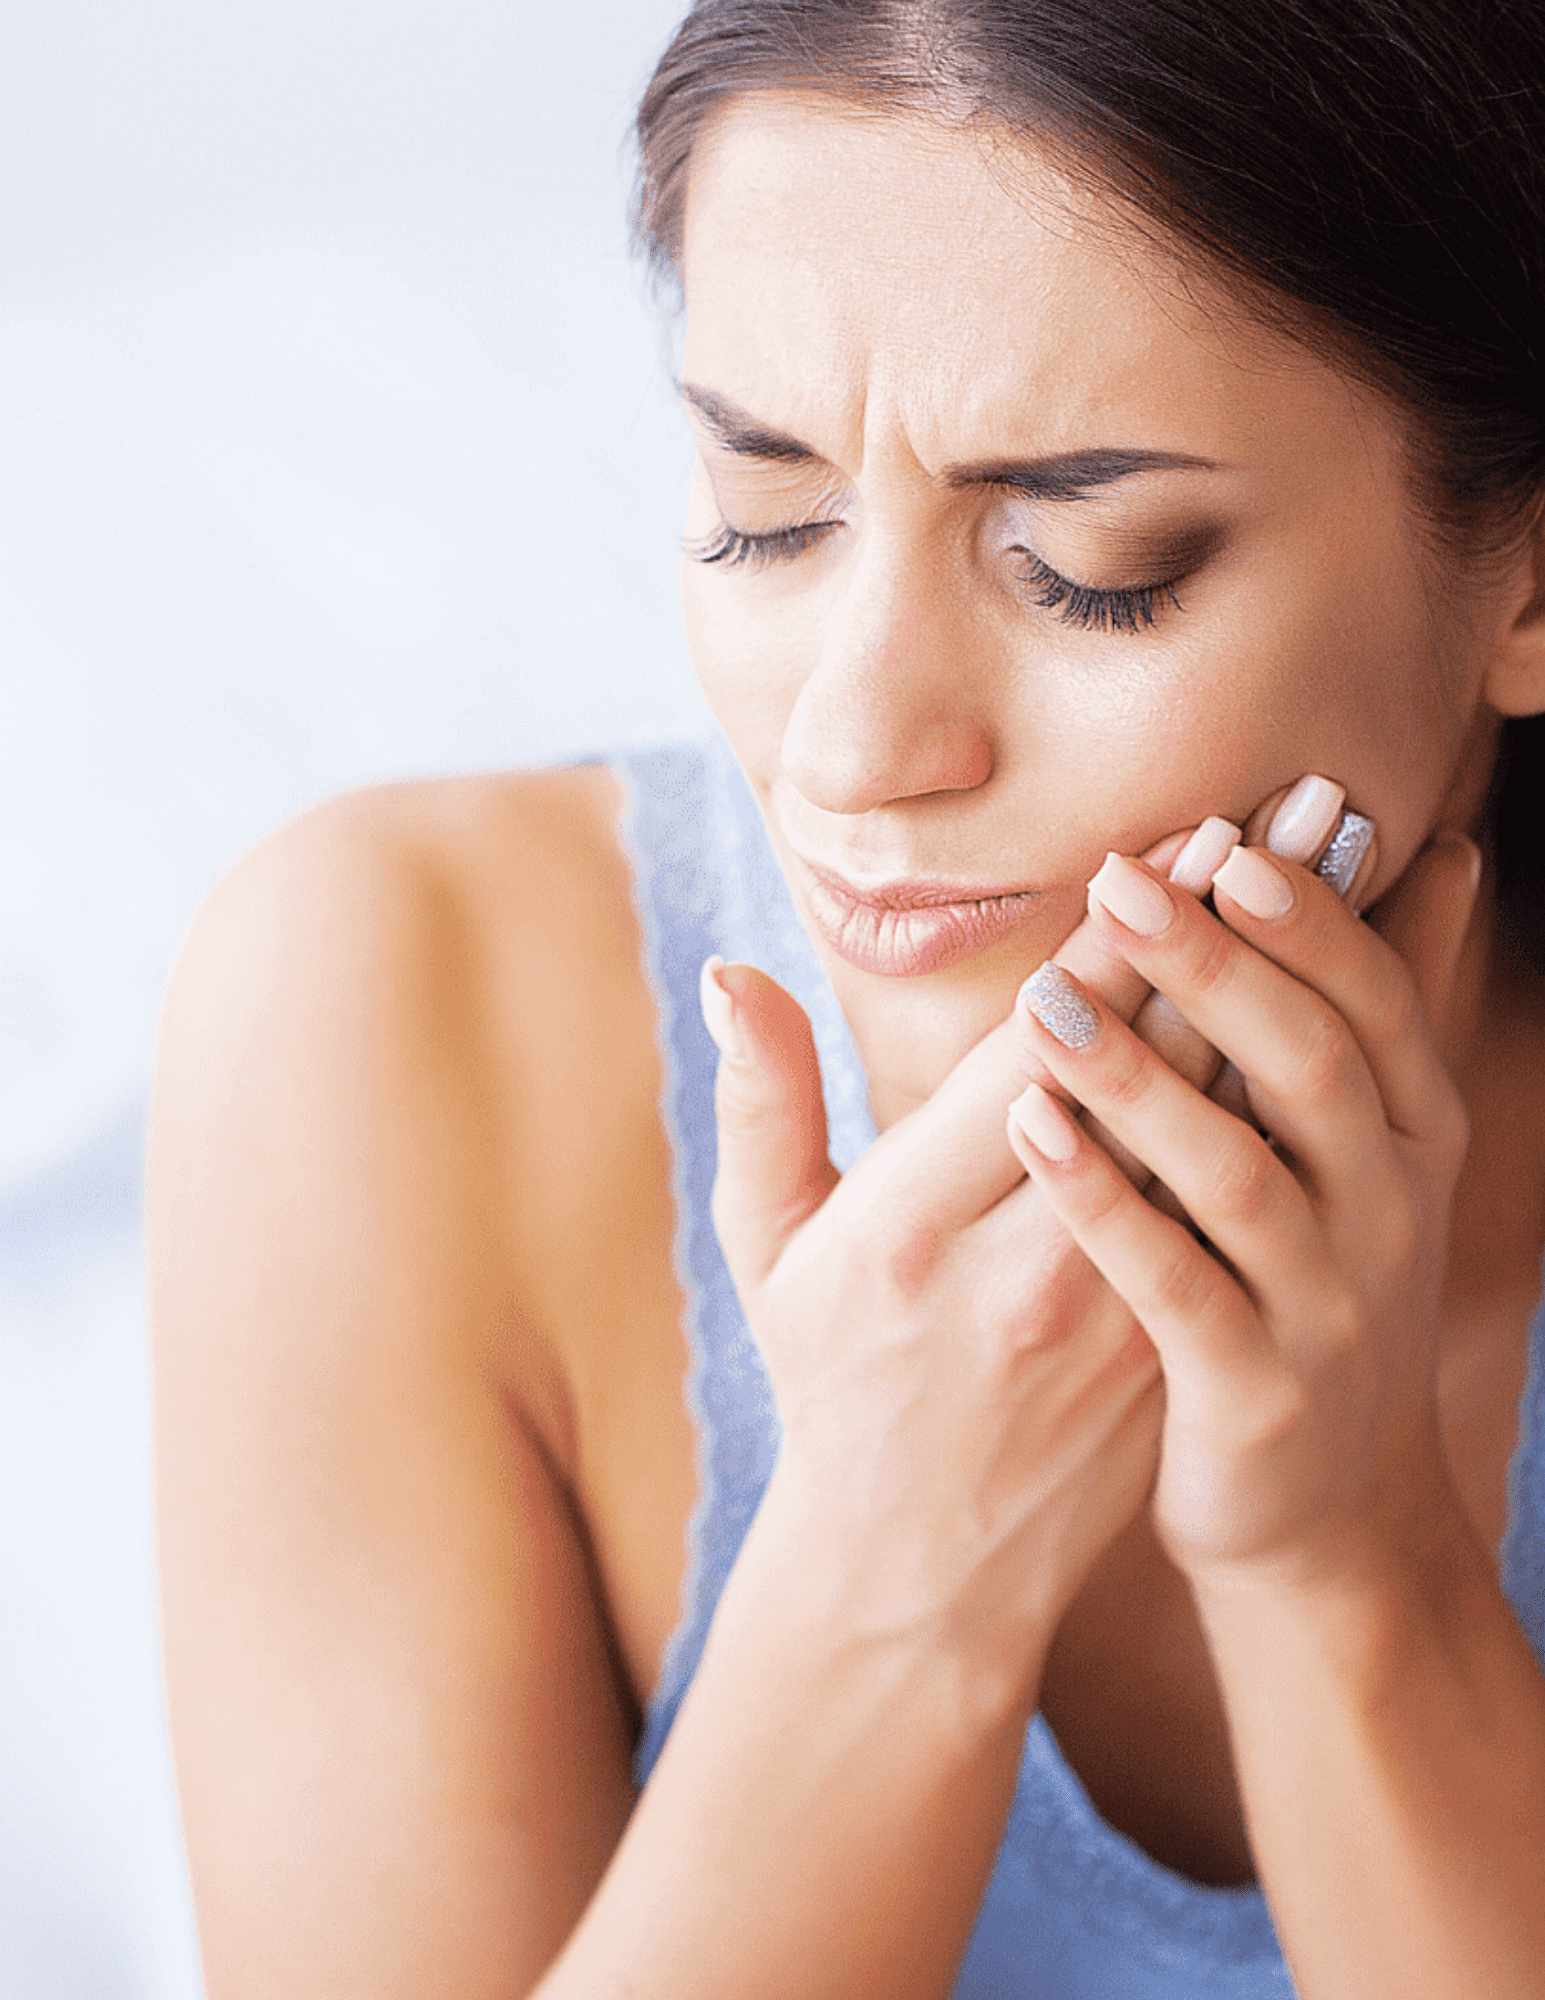 Woman with a toothache looking for Tooth Extractions performed by our dentists in Brentwood, TN